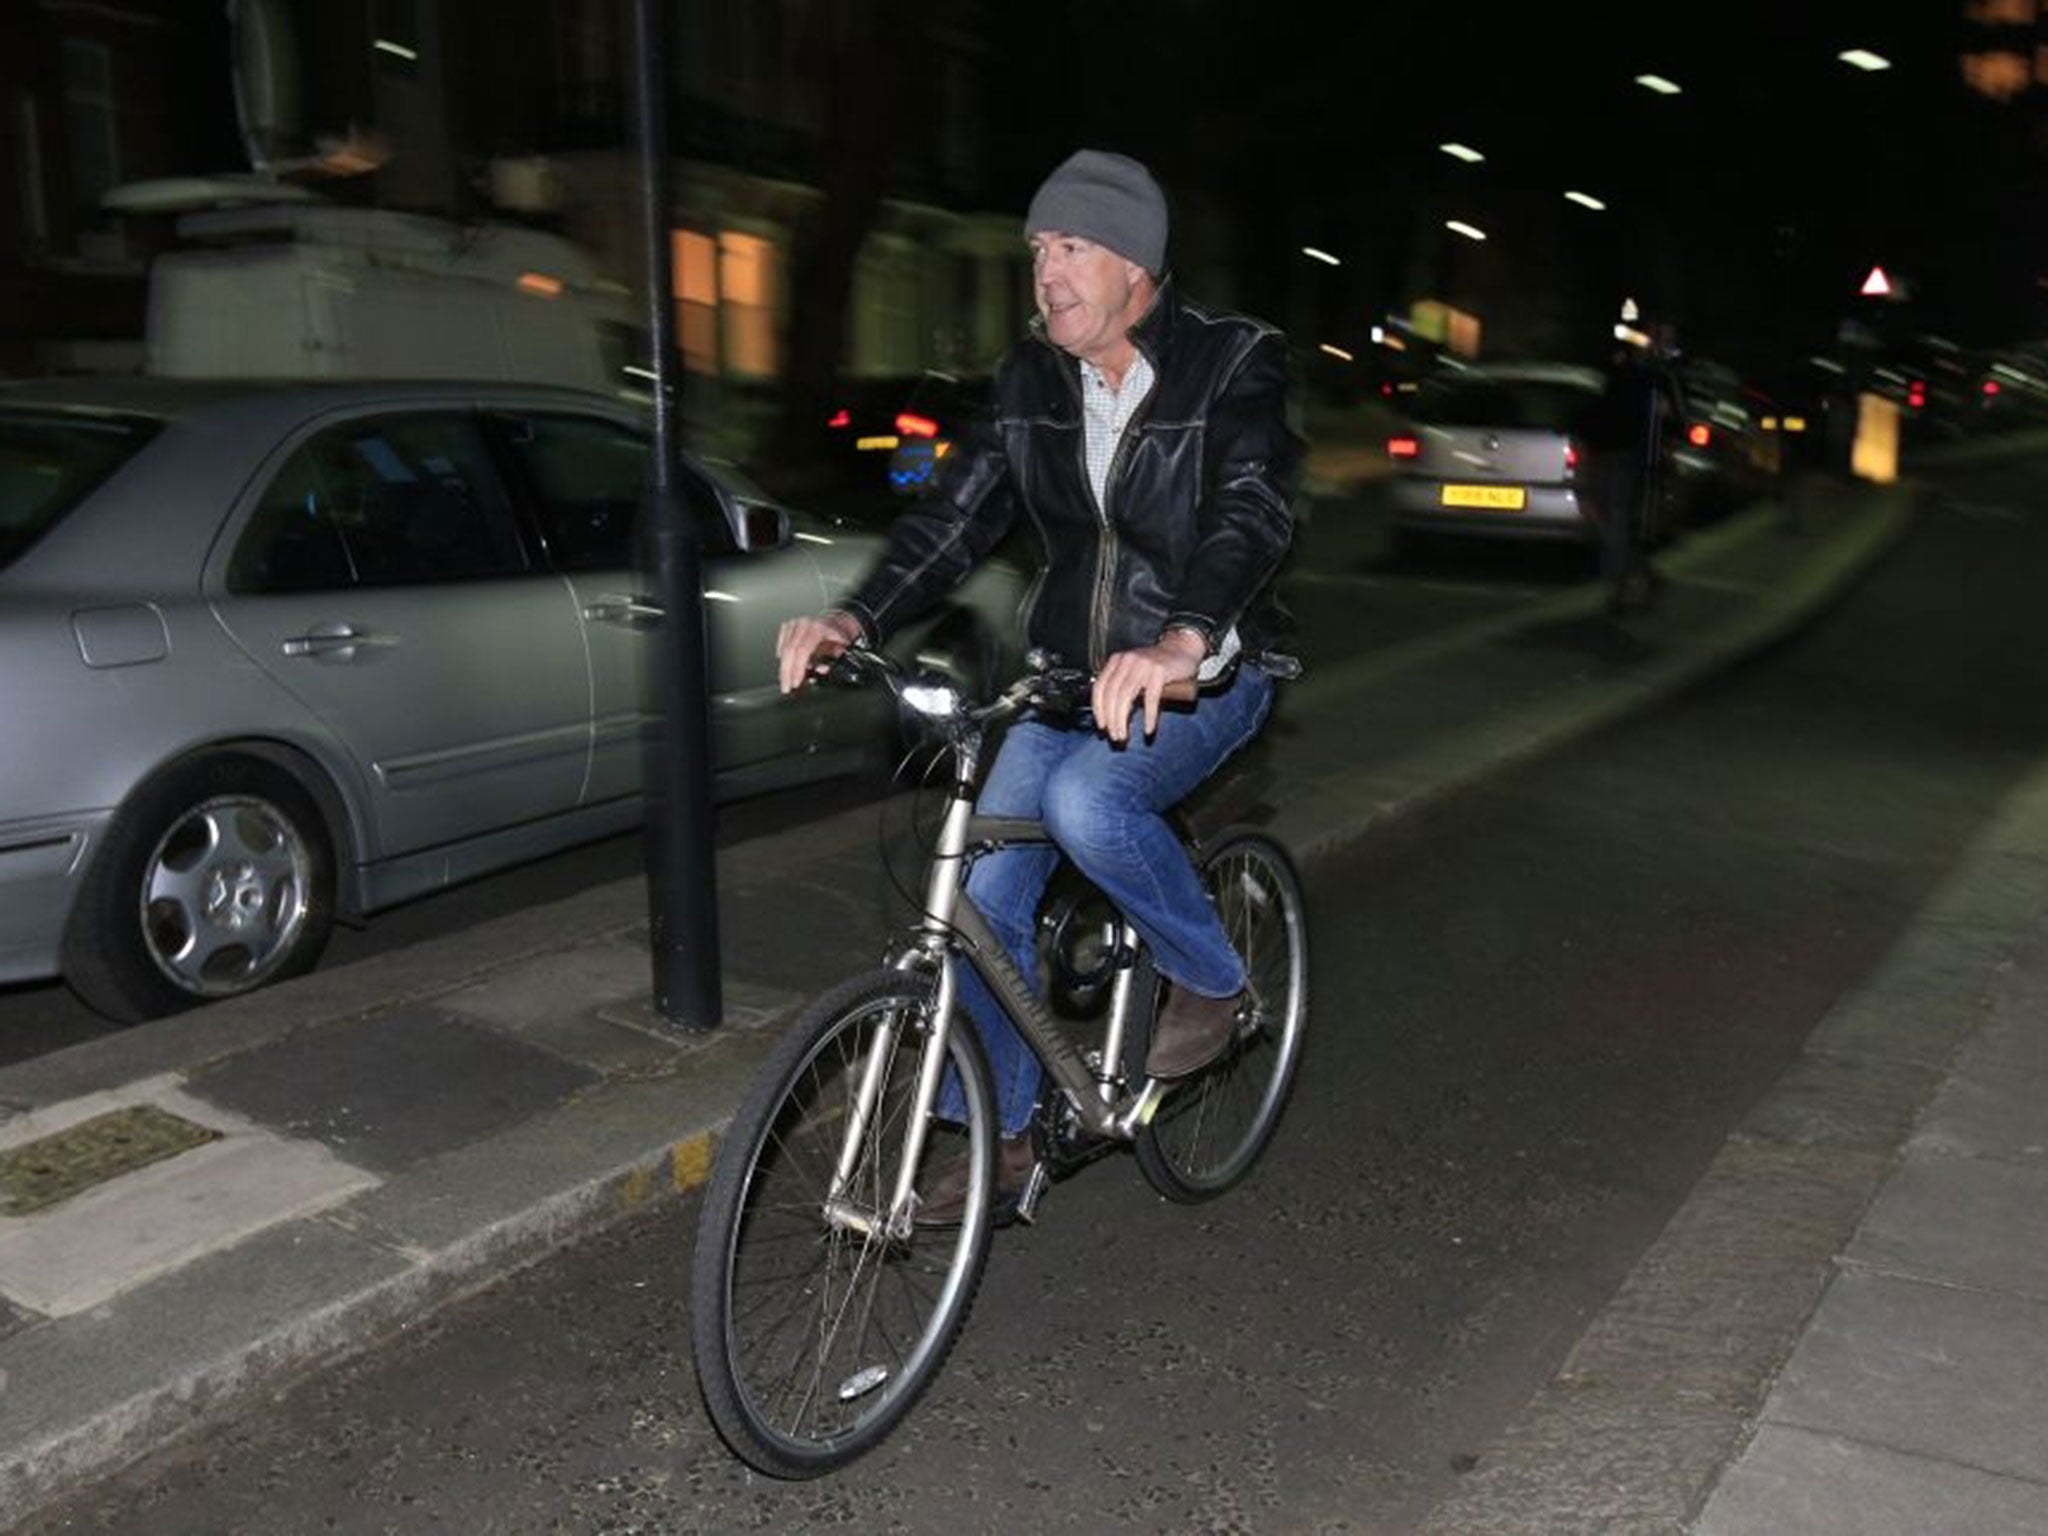 Jeremy Clarkson leaves his home in west London, on a bicycle. (Image: PA)